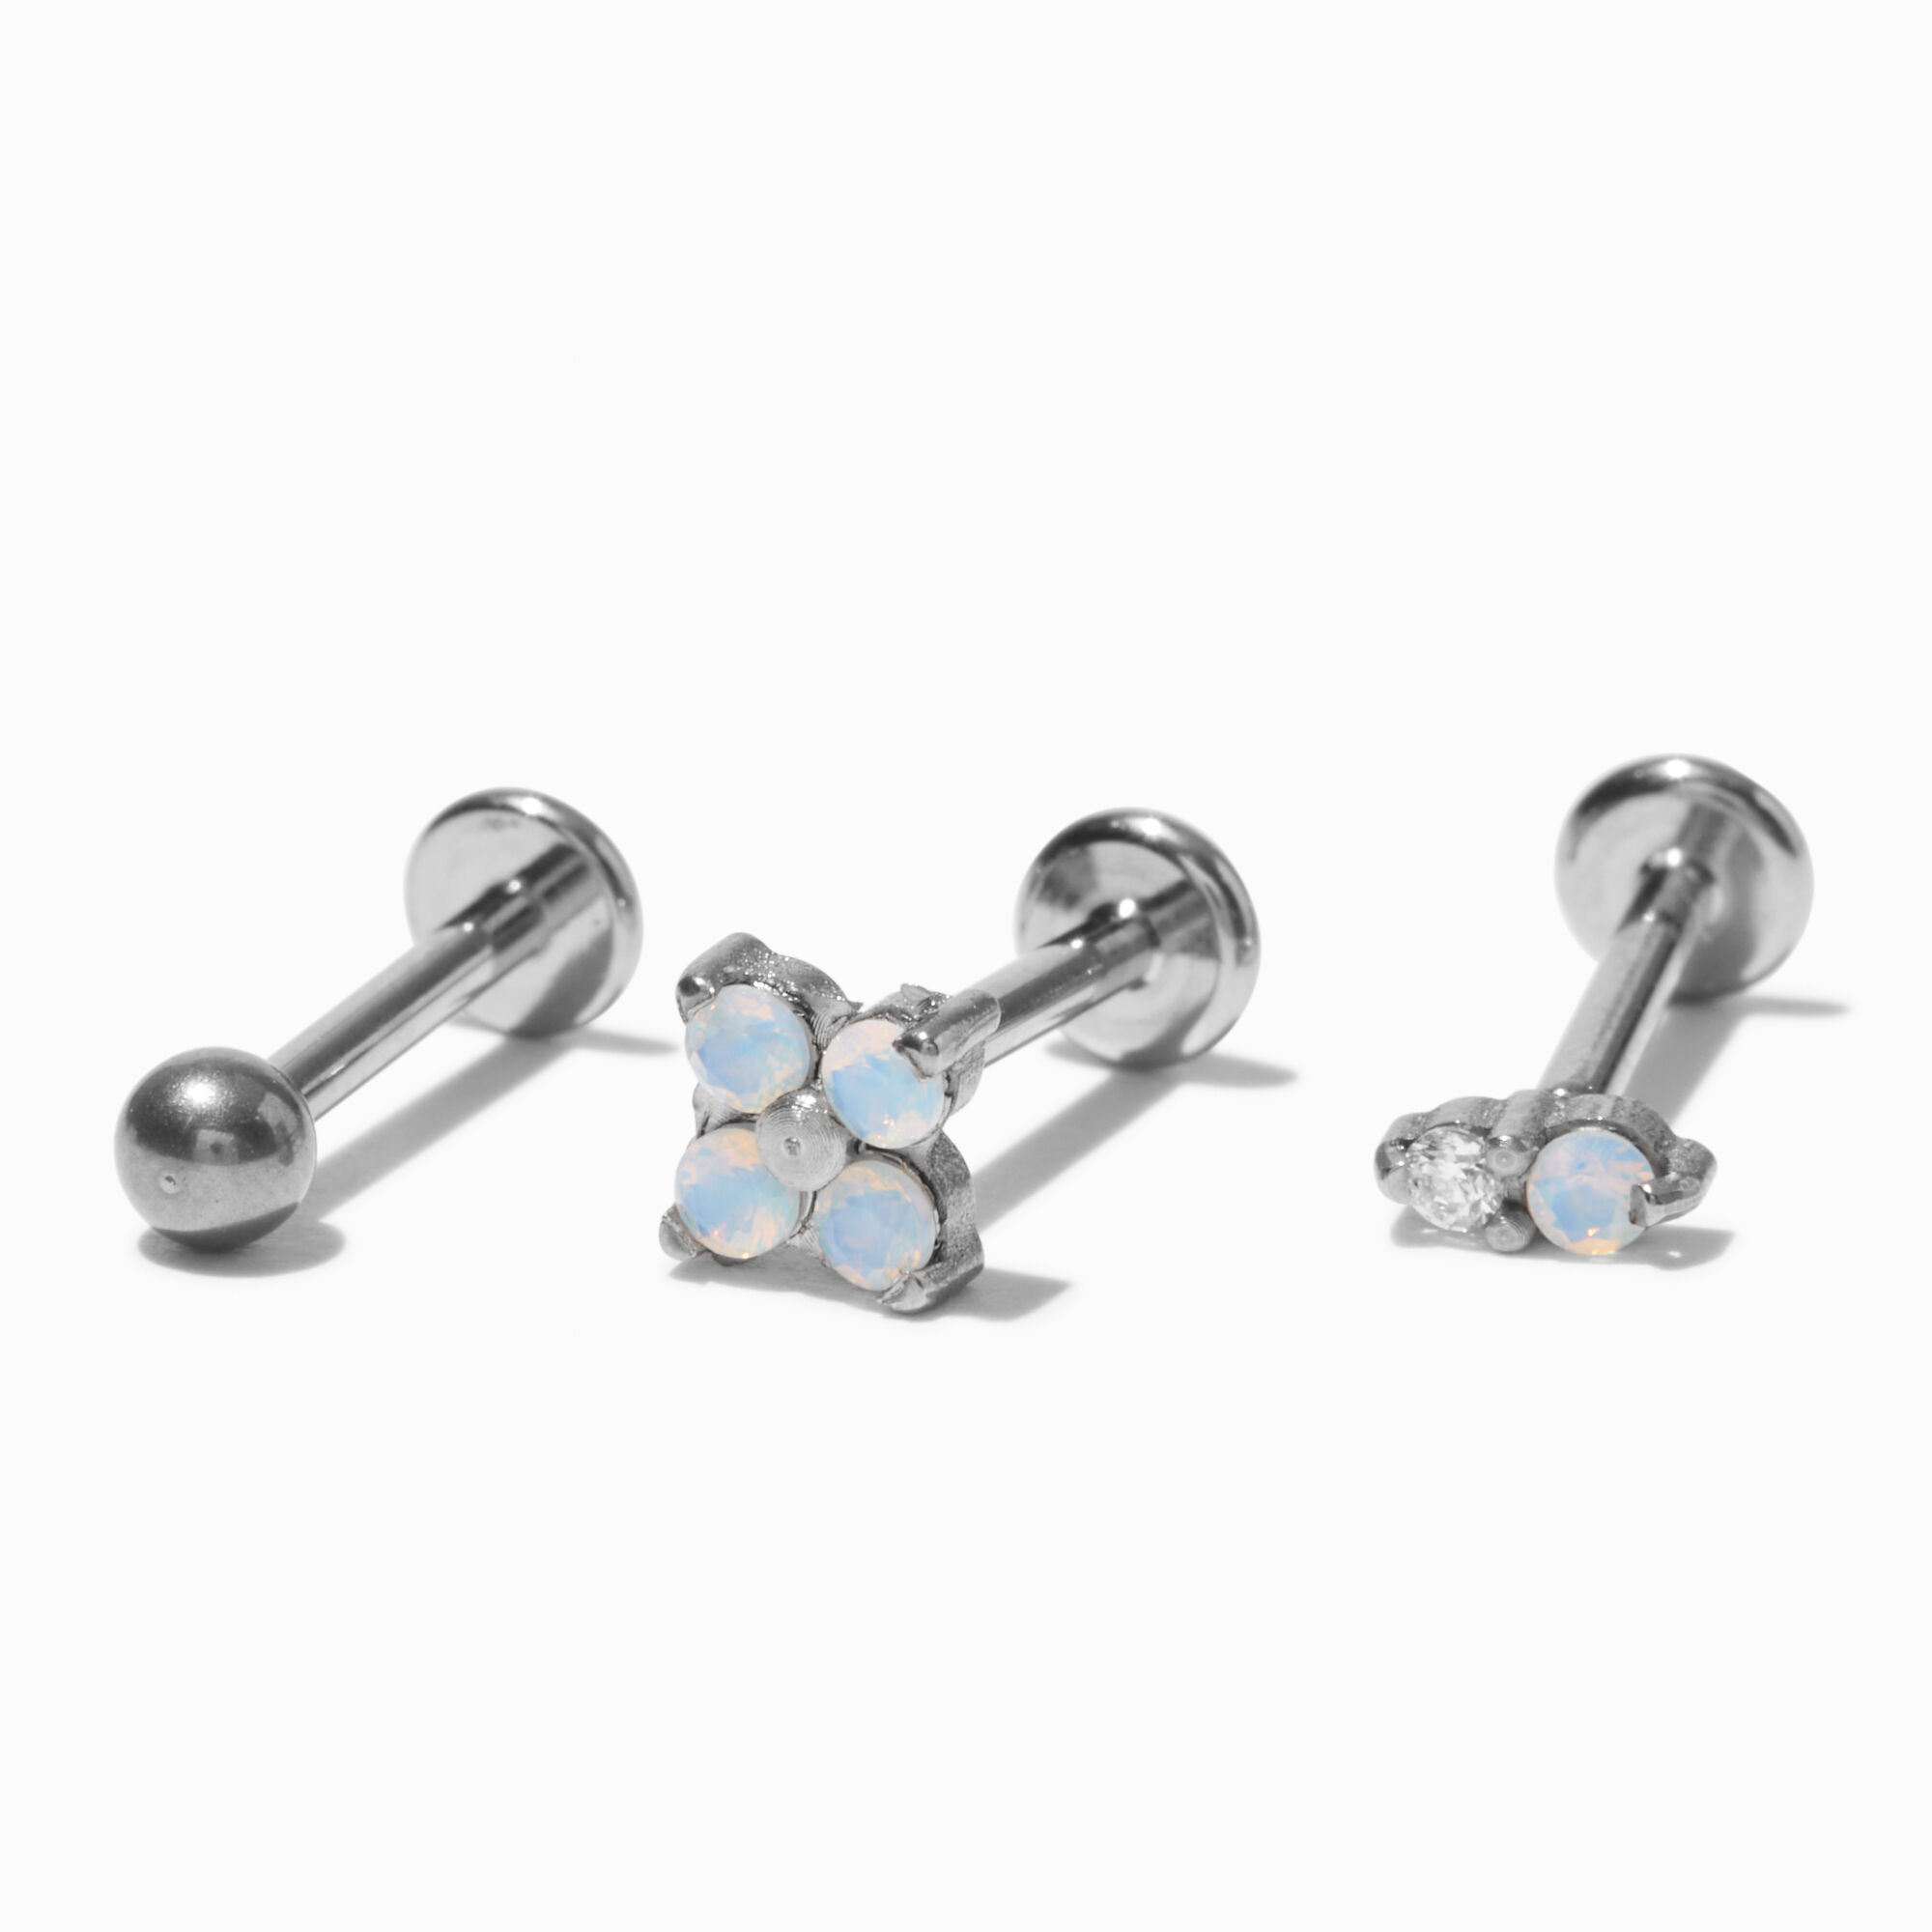 View Claires Titanium 16G Opal Crystal Cartilage Stud Earrings 3 Pack Silver information